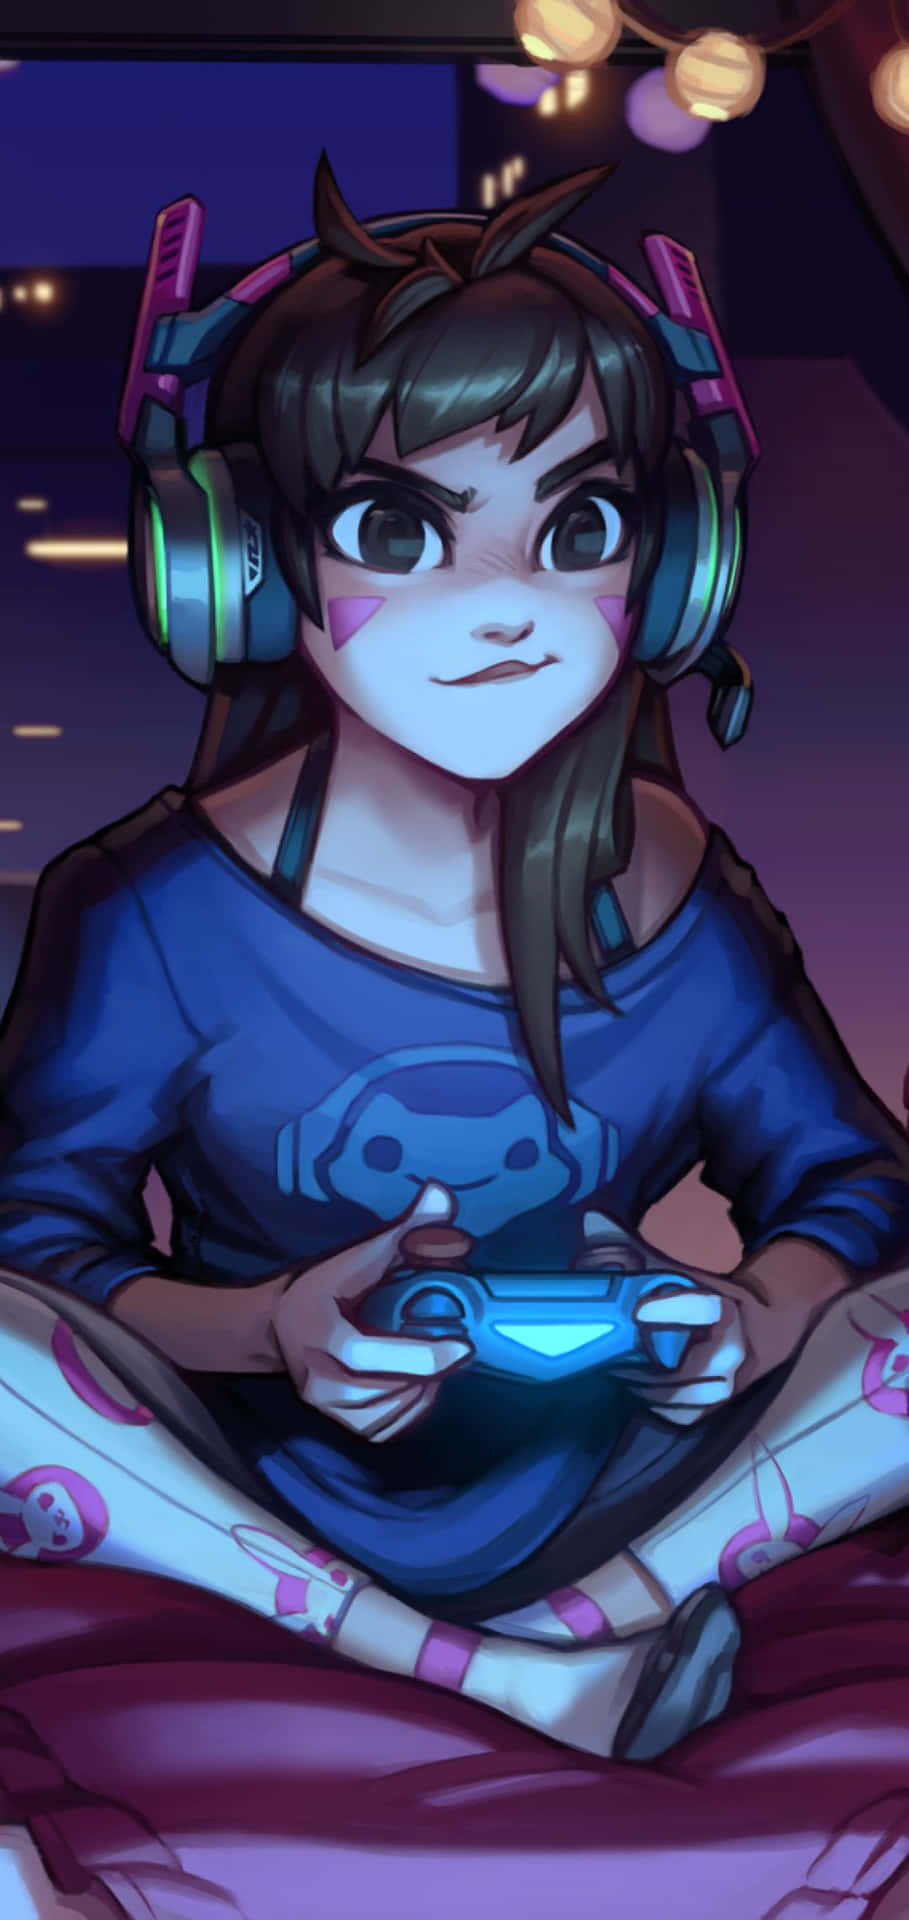 Image  D.Va takes on the world in the popular multiplayer game, Overwatch. Wallpaper